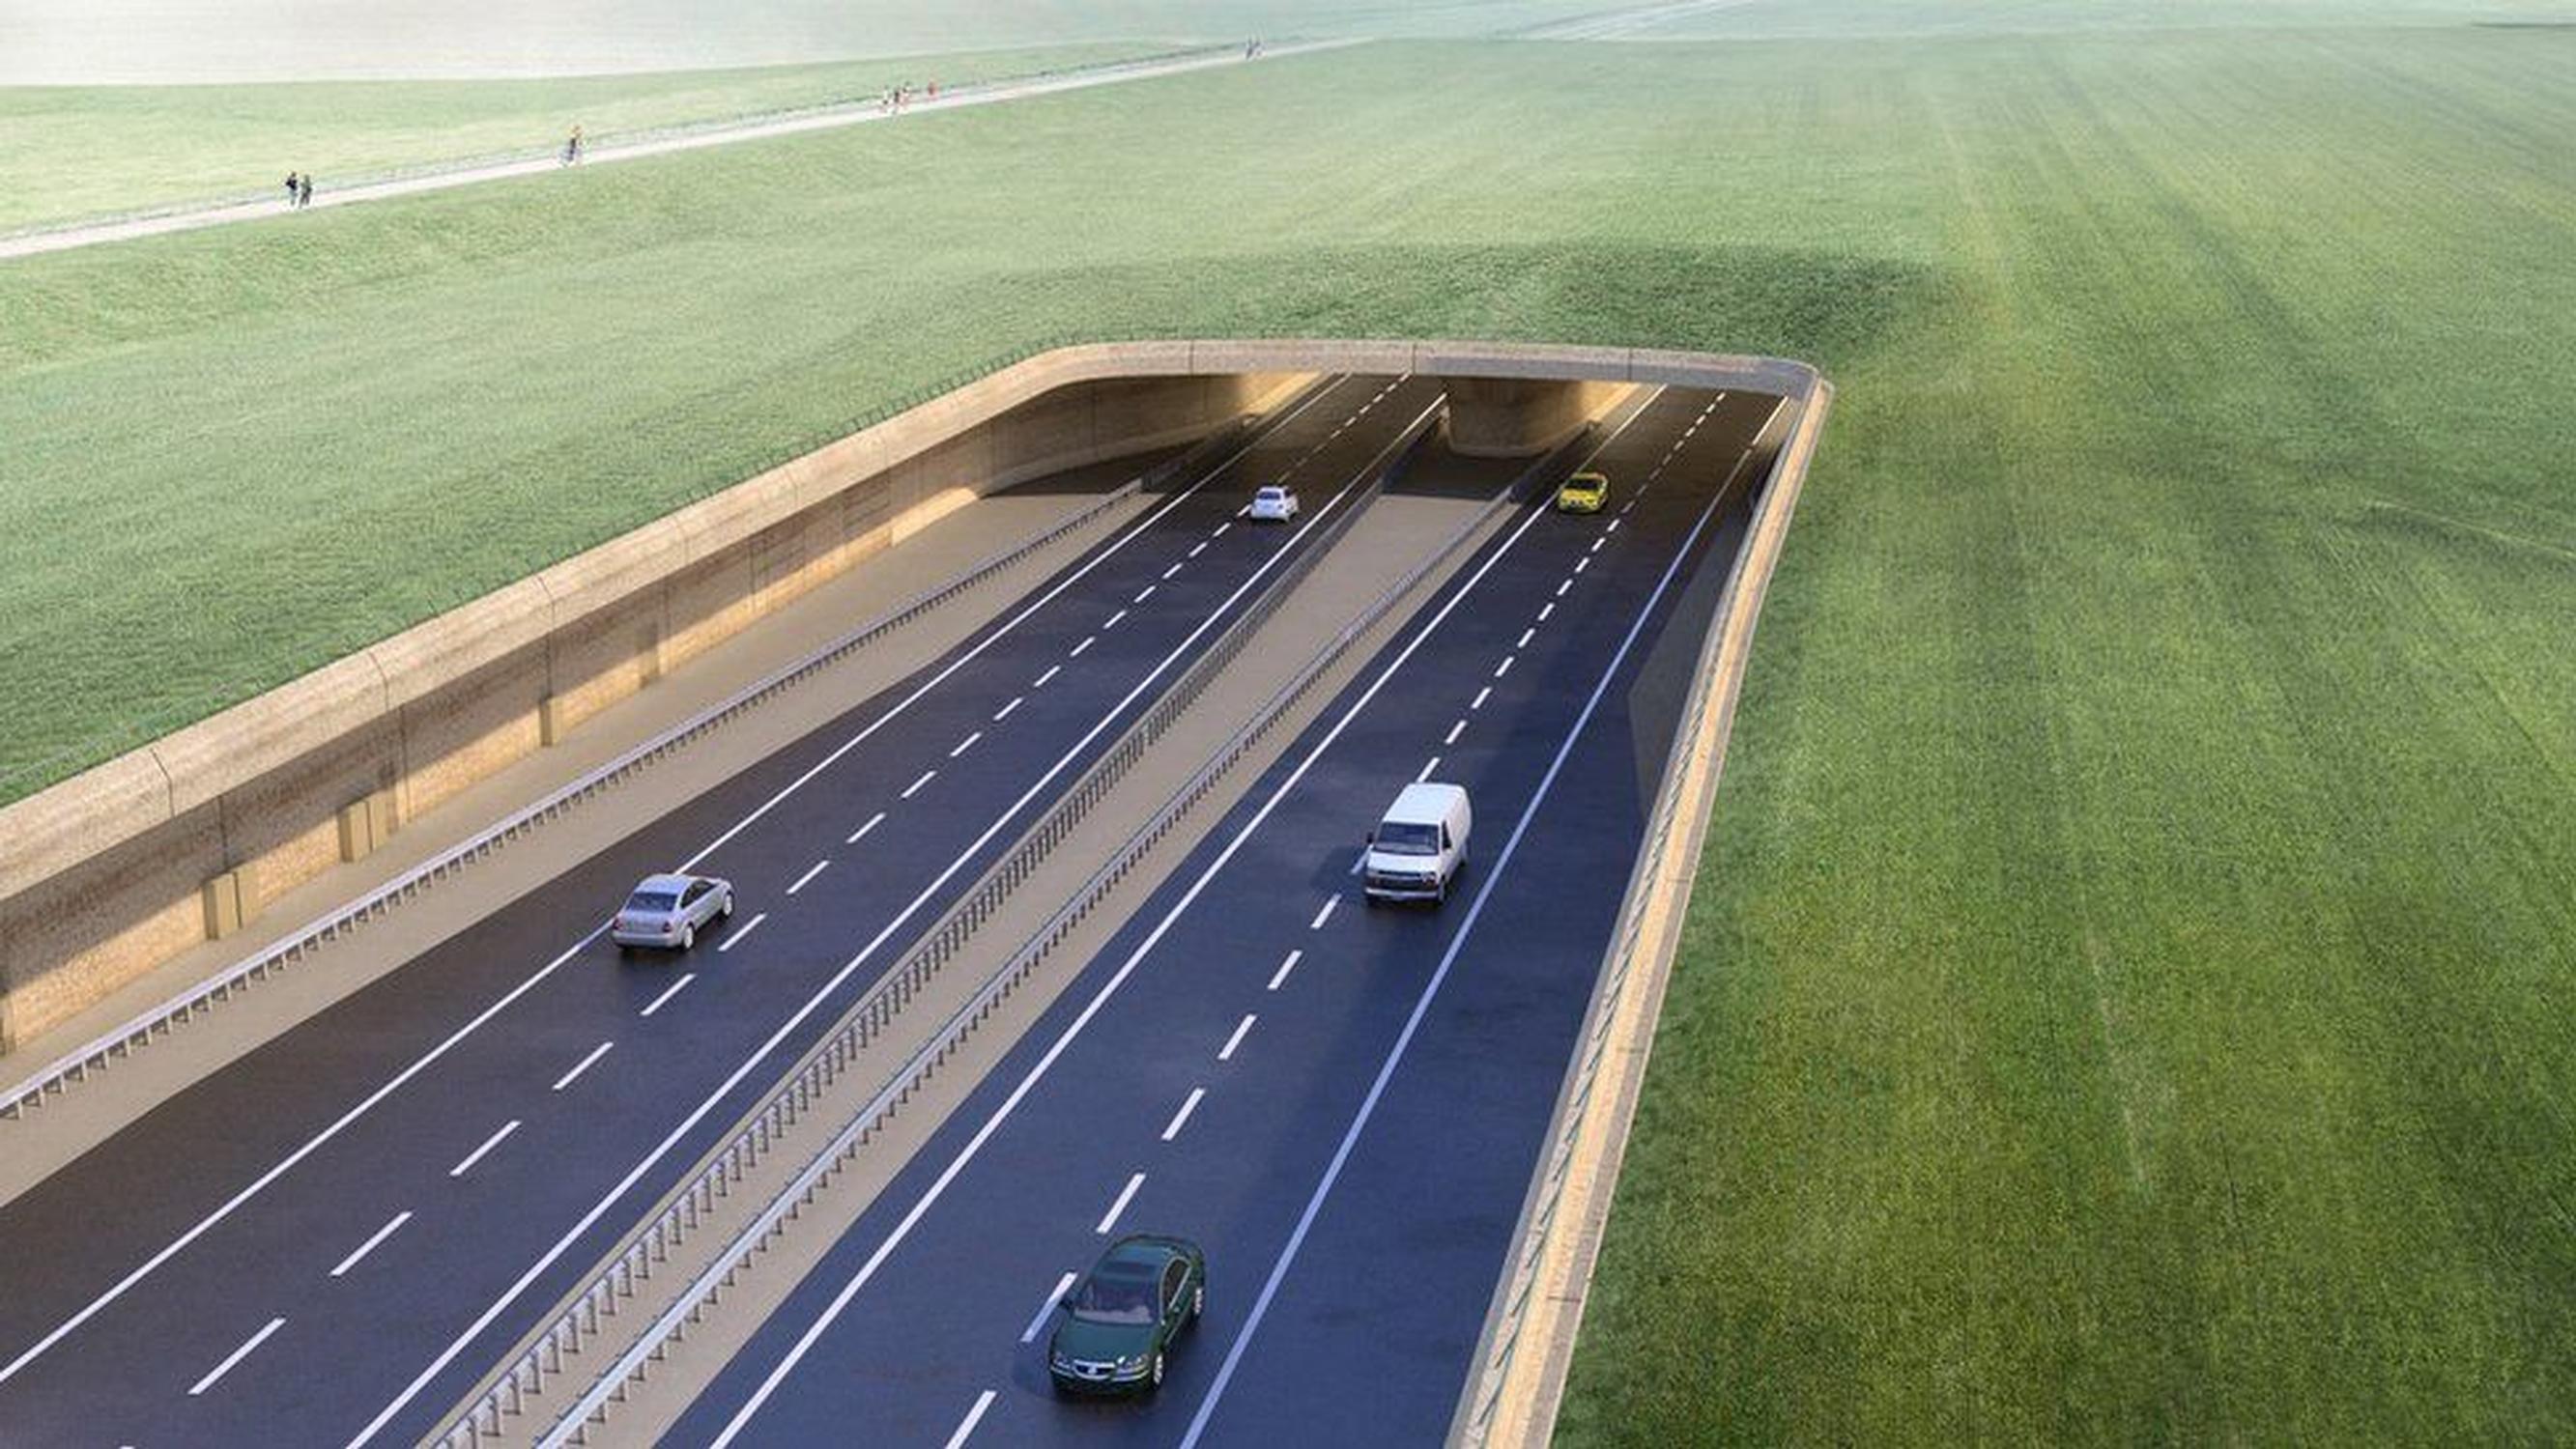 Grant Shapps backed the £1.7bn scheme to overhaul eight miles of the A303, including a two-mile tunnel